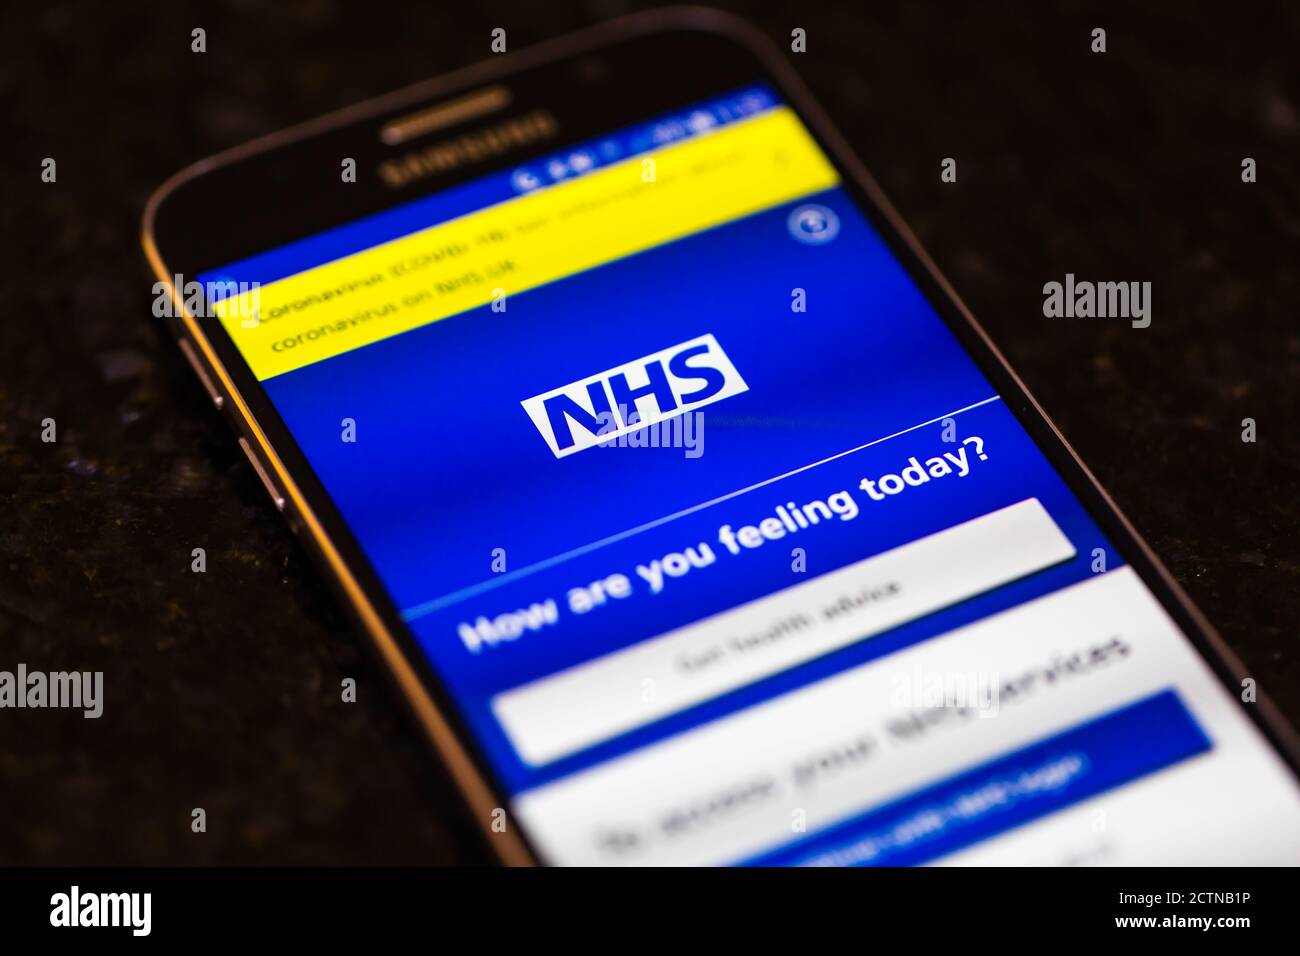 The Nhs Track And Trace App Home Screen Seen On The Screen Of A Samsung Android Mobile Phone Stock Photo Alamy